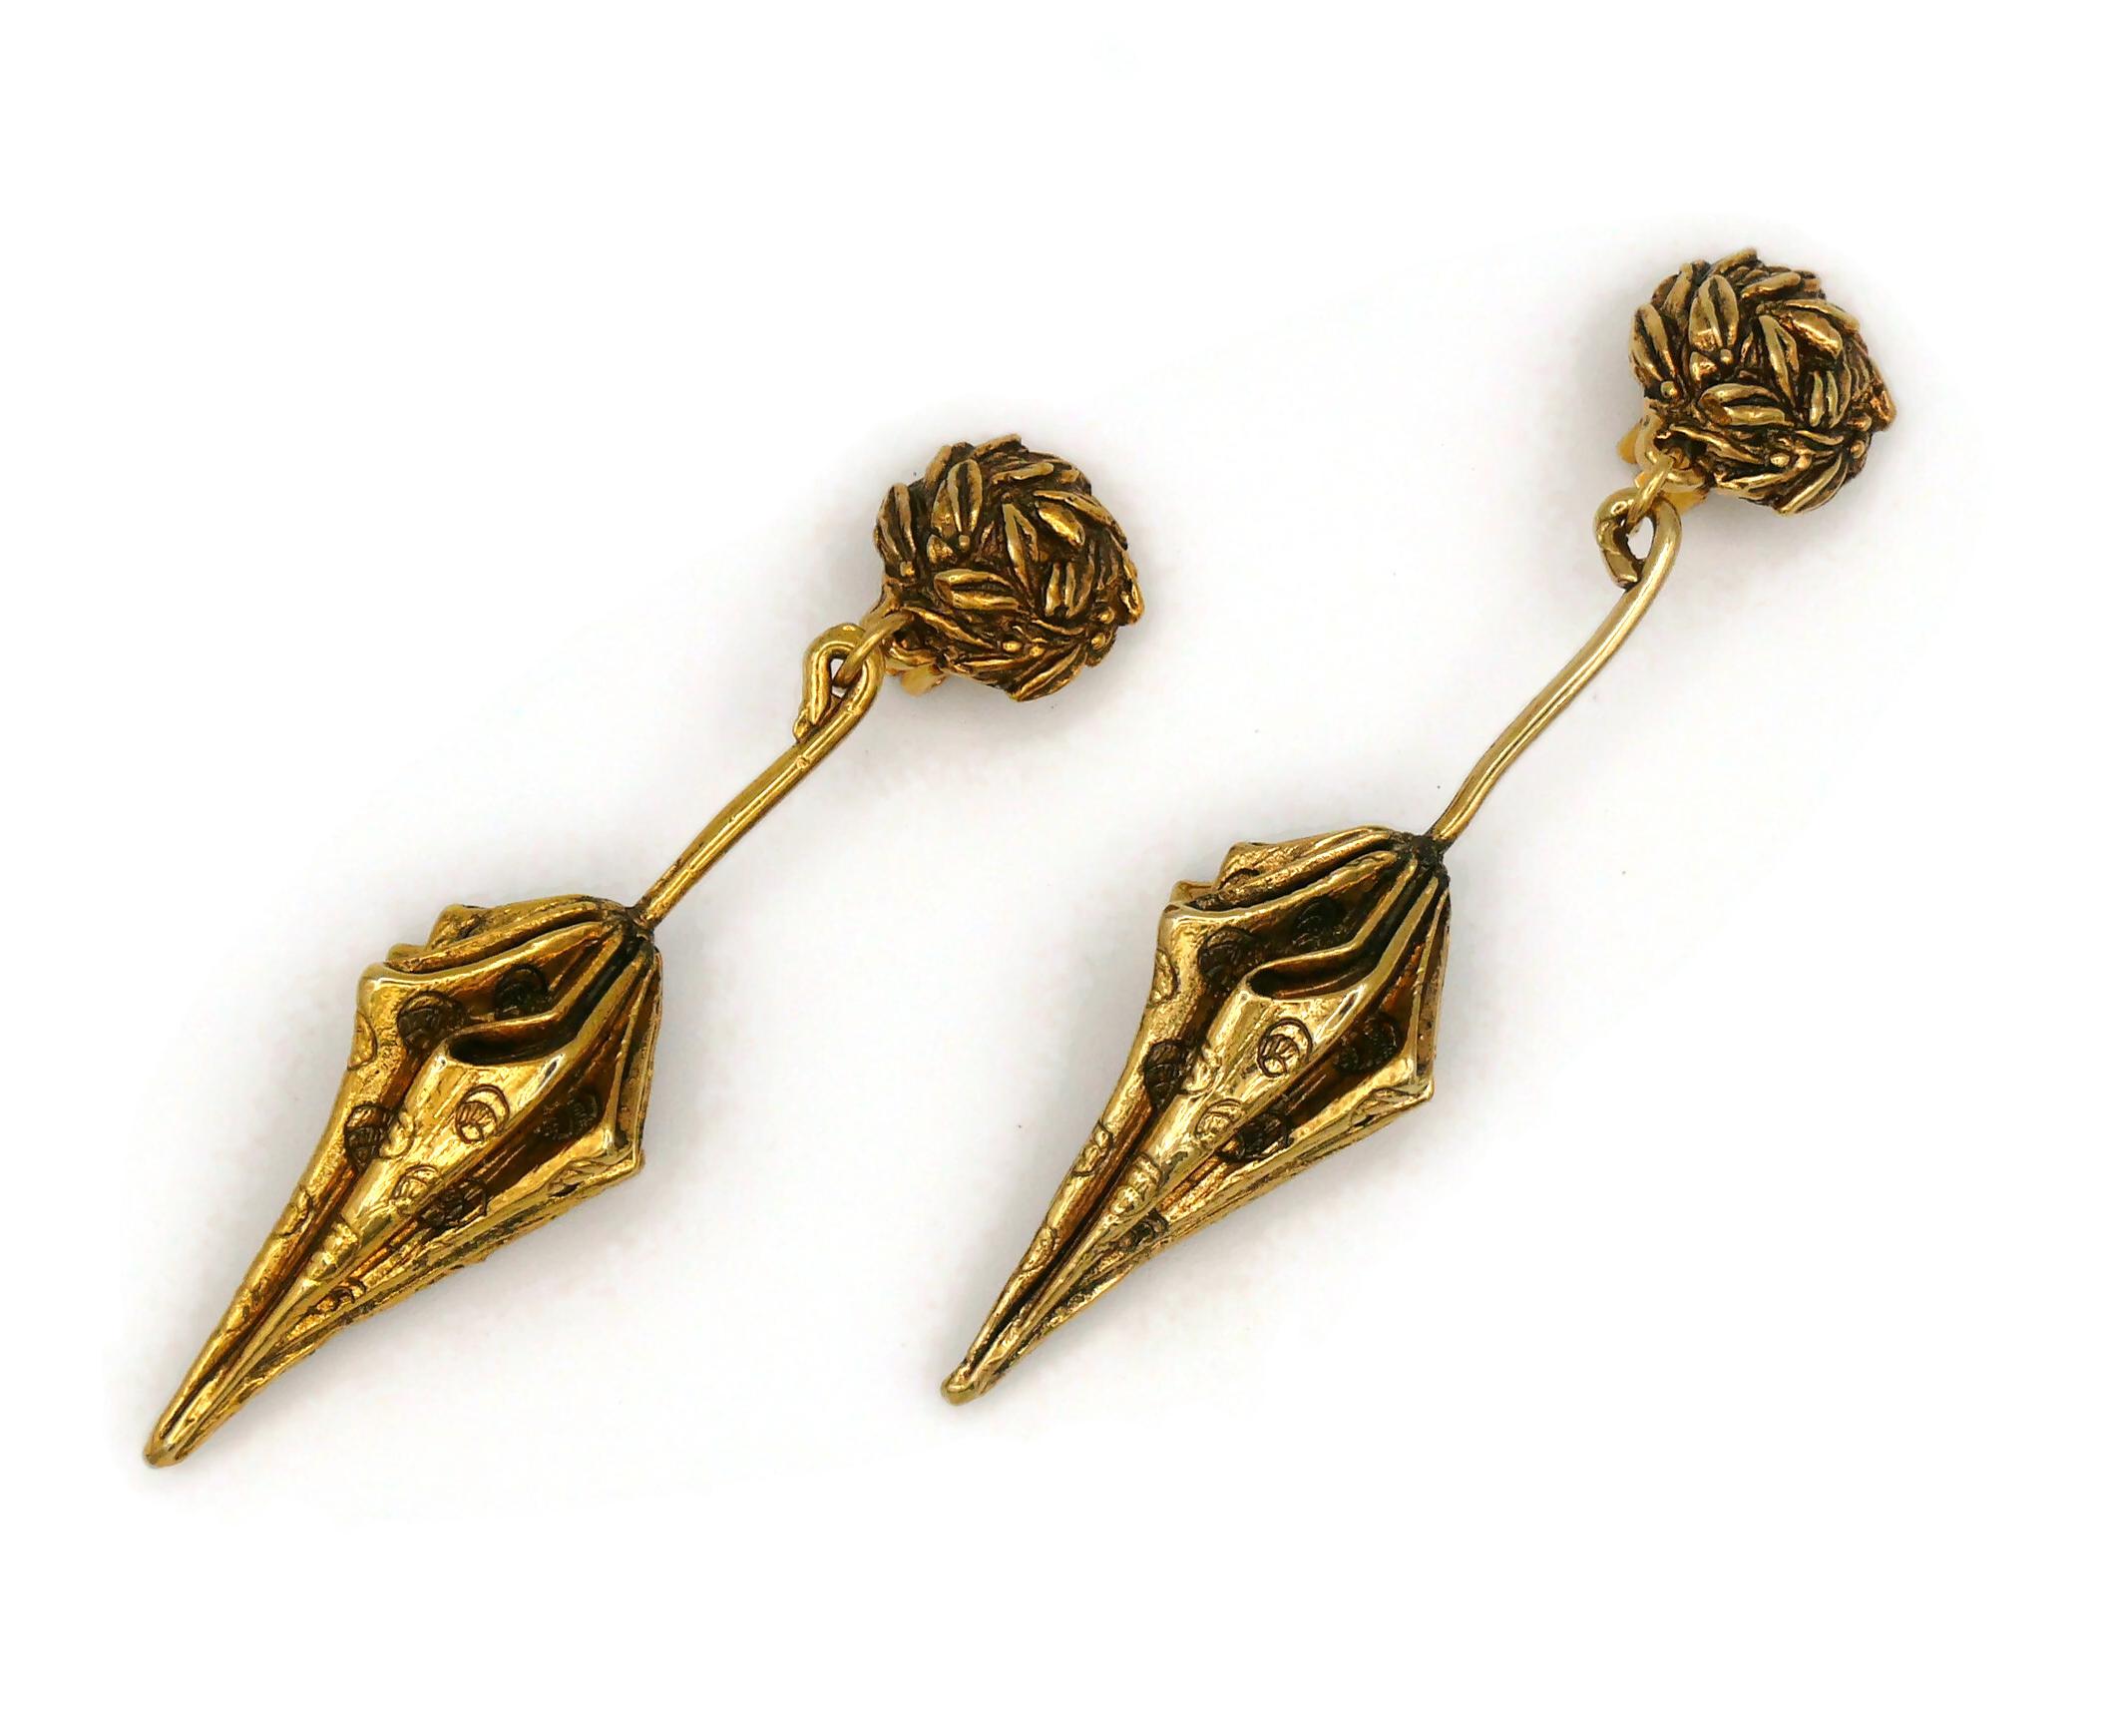 Women's Chantal Thomass (Attributed to) Vintage Umbrella Dangling Earrings For Sale